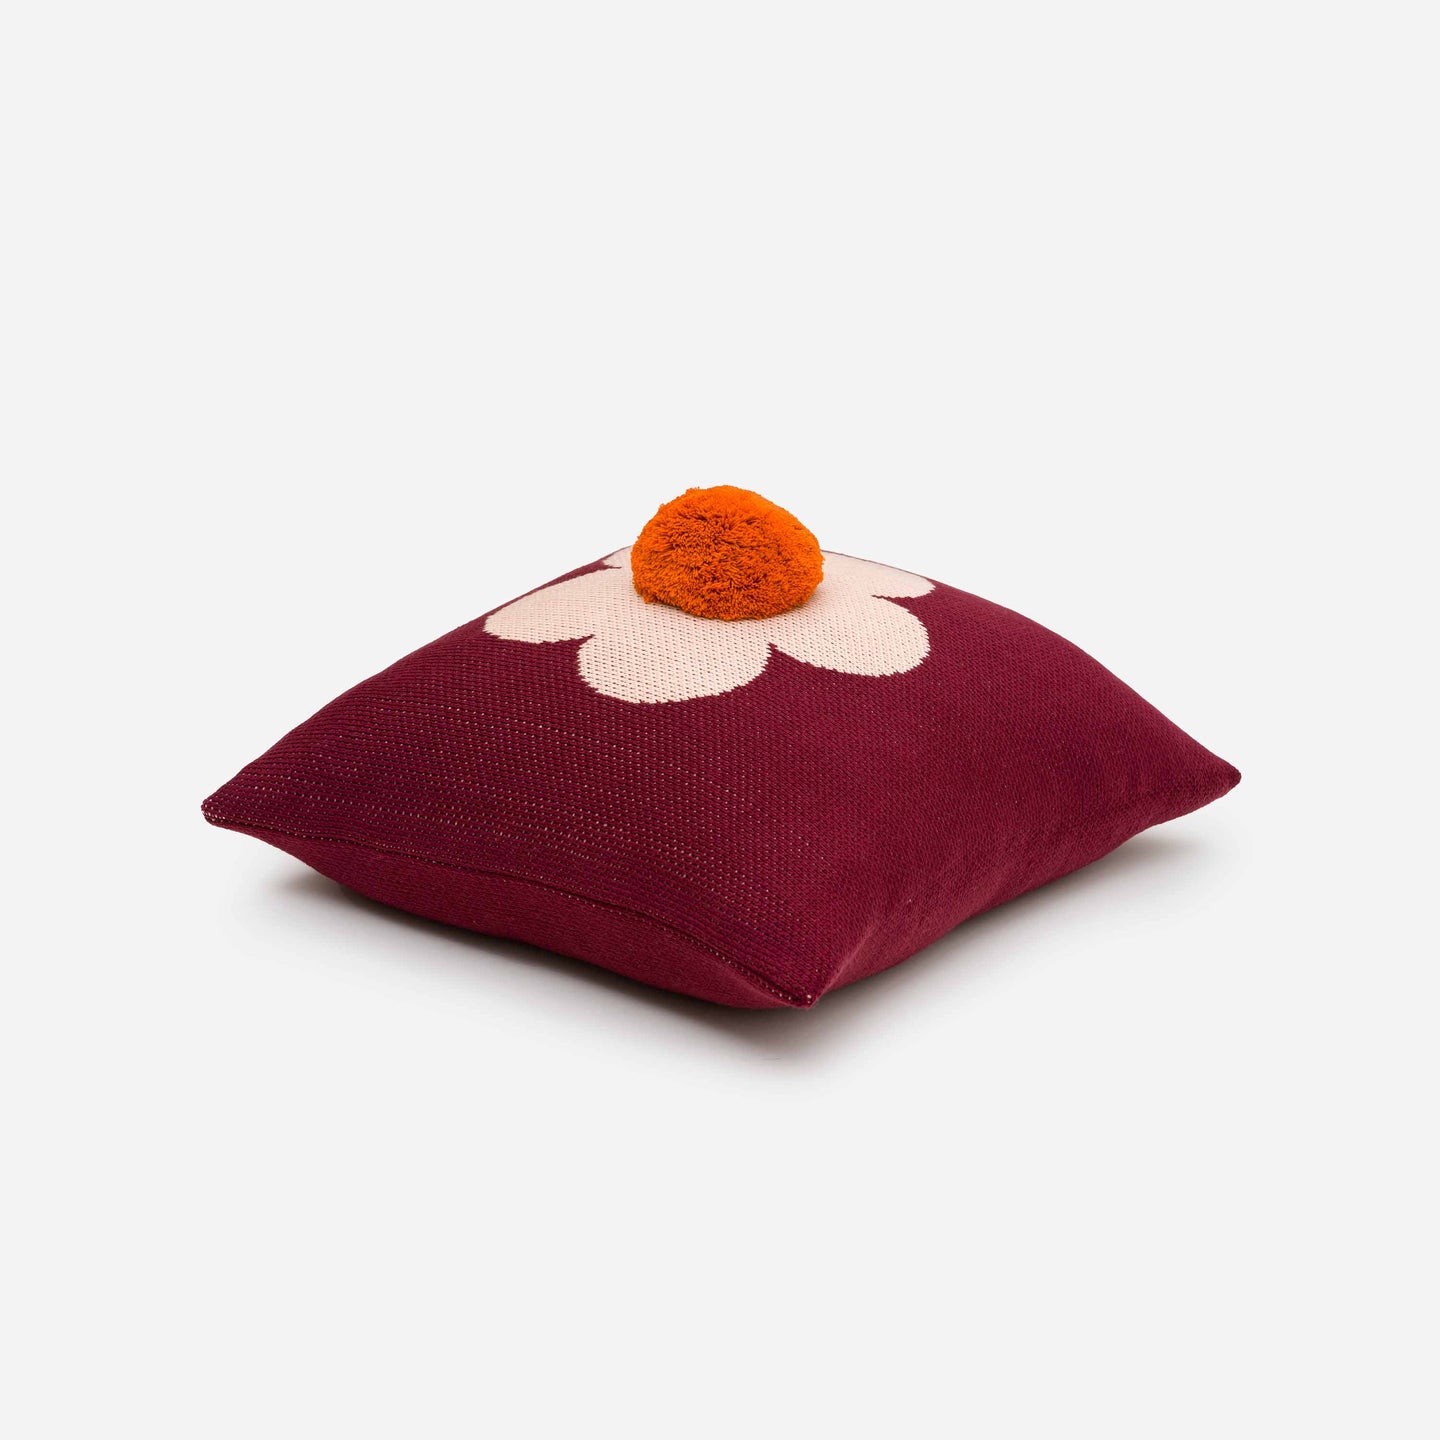 Flower Pom Pillow Daisy Cover Side View